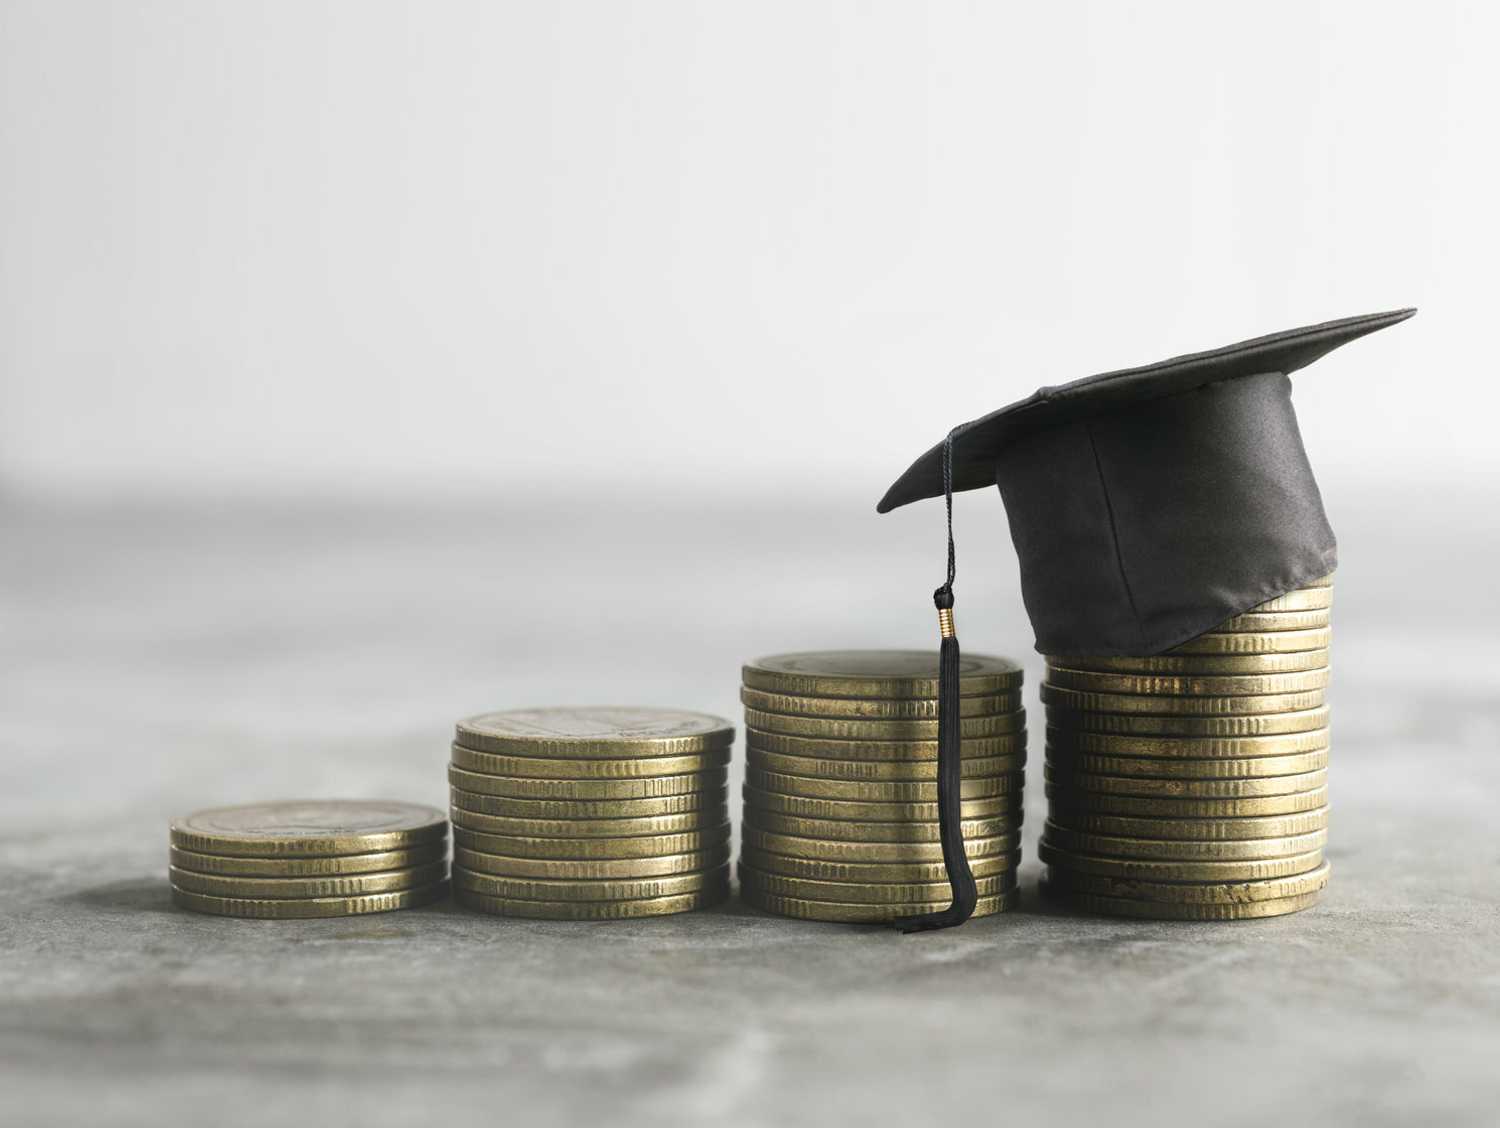 Student Loan Debt: Is It Perceived As Normal?